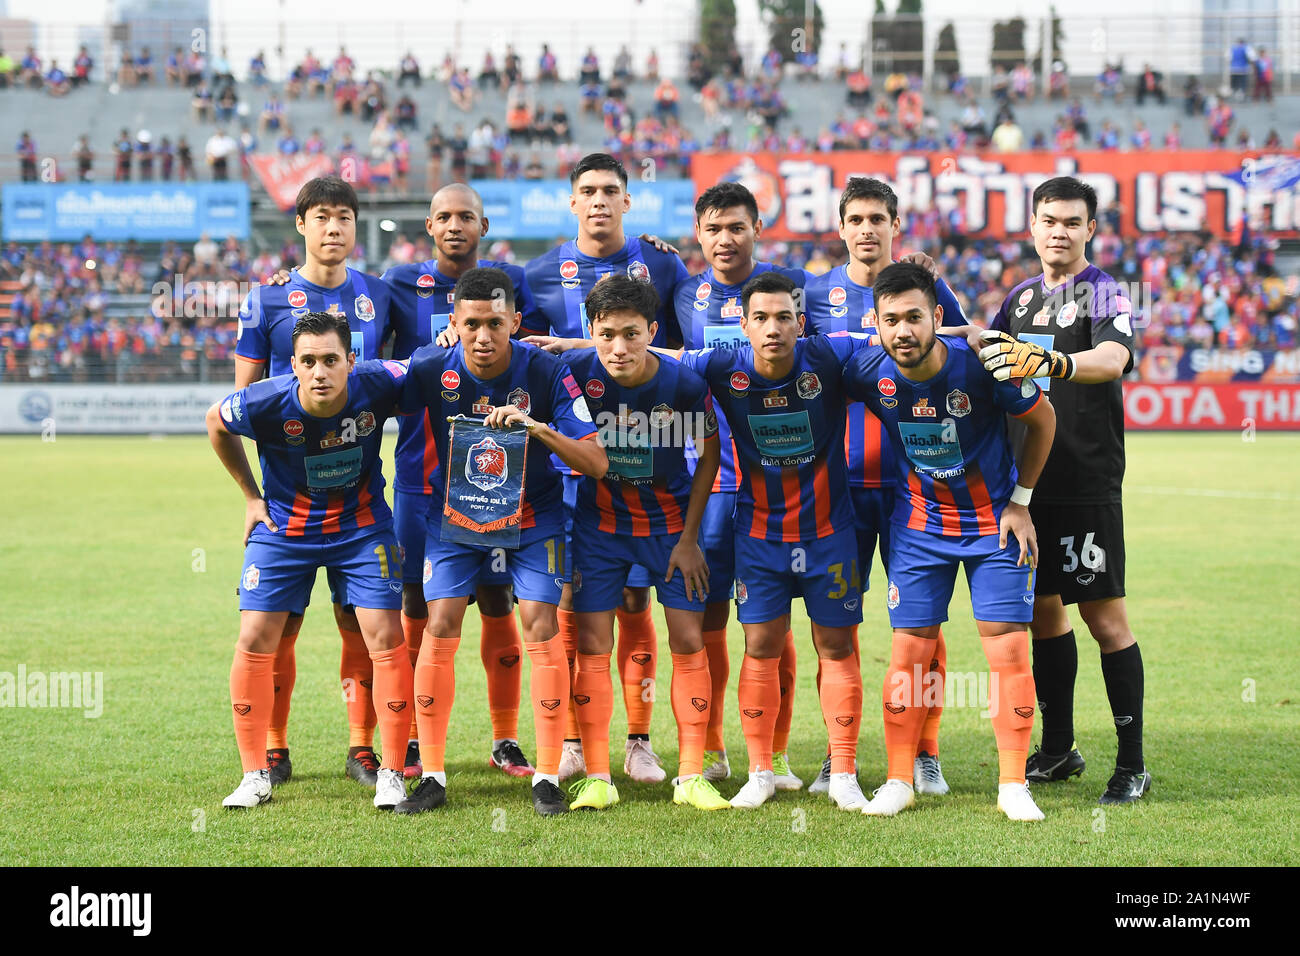 Players Of Port Fc Pose During Thai League 19 Between Port Fc And Nakhon Ratchasima Fc At Pat Stadium Onseptember 27 19 In Bangkok Thailand Photo By Amphol Thongmueangluang Pacific Press Credit Pacific